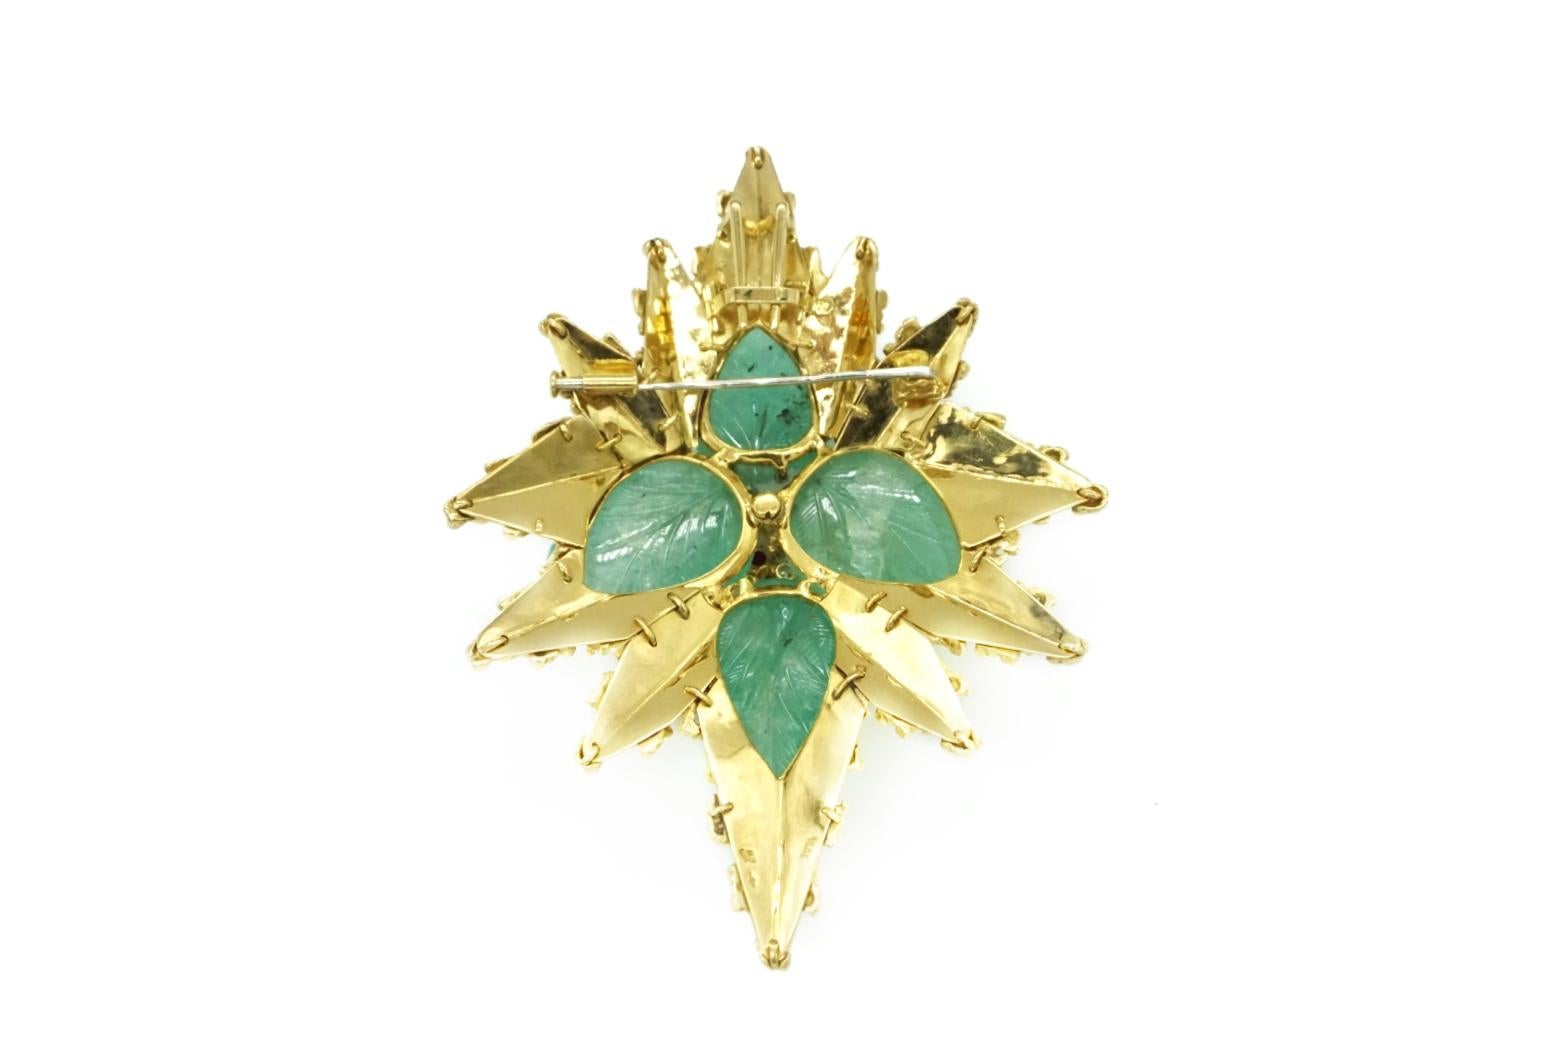 An exquisite Emerald, Diamond and Ruby Brooch/Pendant in 18k Yellow Gold 
Set with 4 Emeralds weighing app. 125.00 ct (leaves 7 Burma Rubies weighing app. 1.10ct and 13 Diamonds weighing app. 2.50 ct). Made in France, circa 1950.
F-G Color, VVS-VS